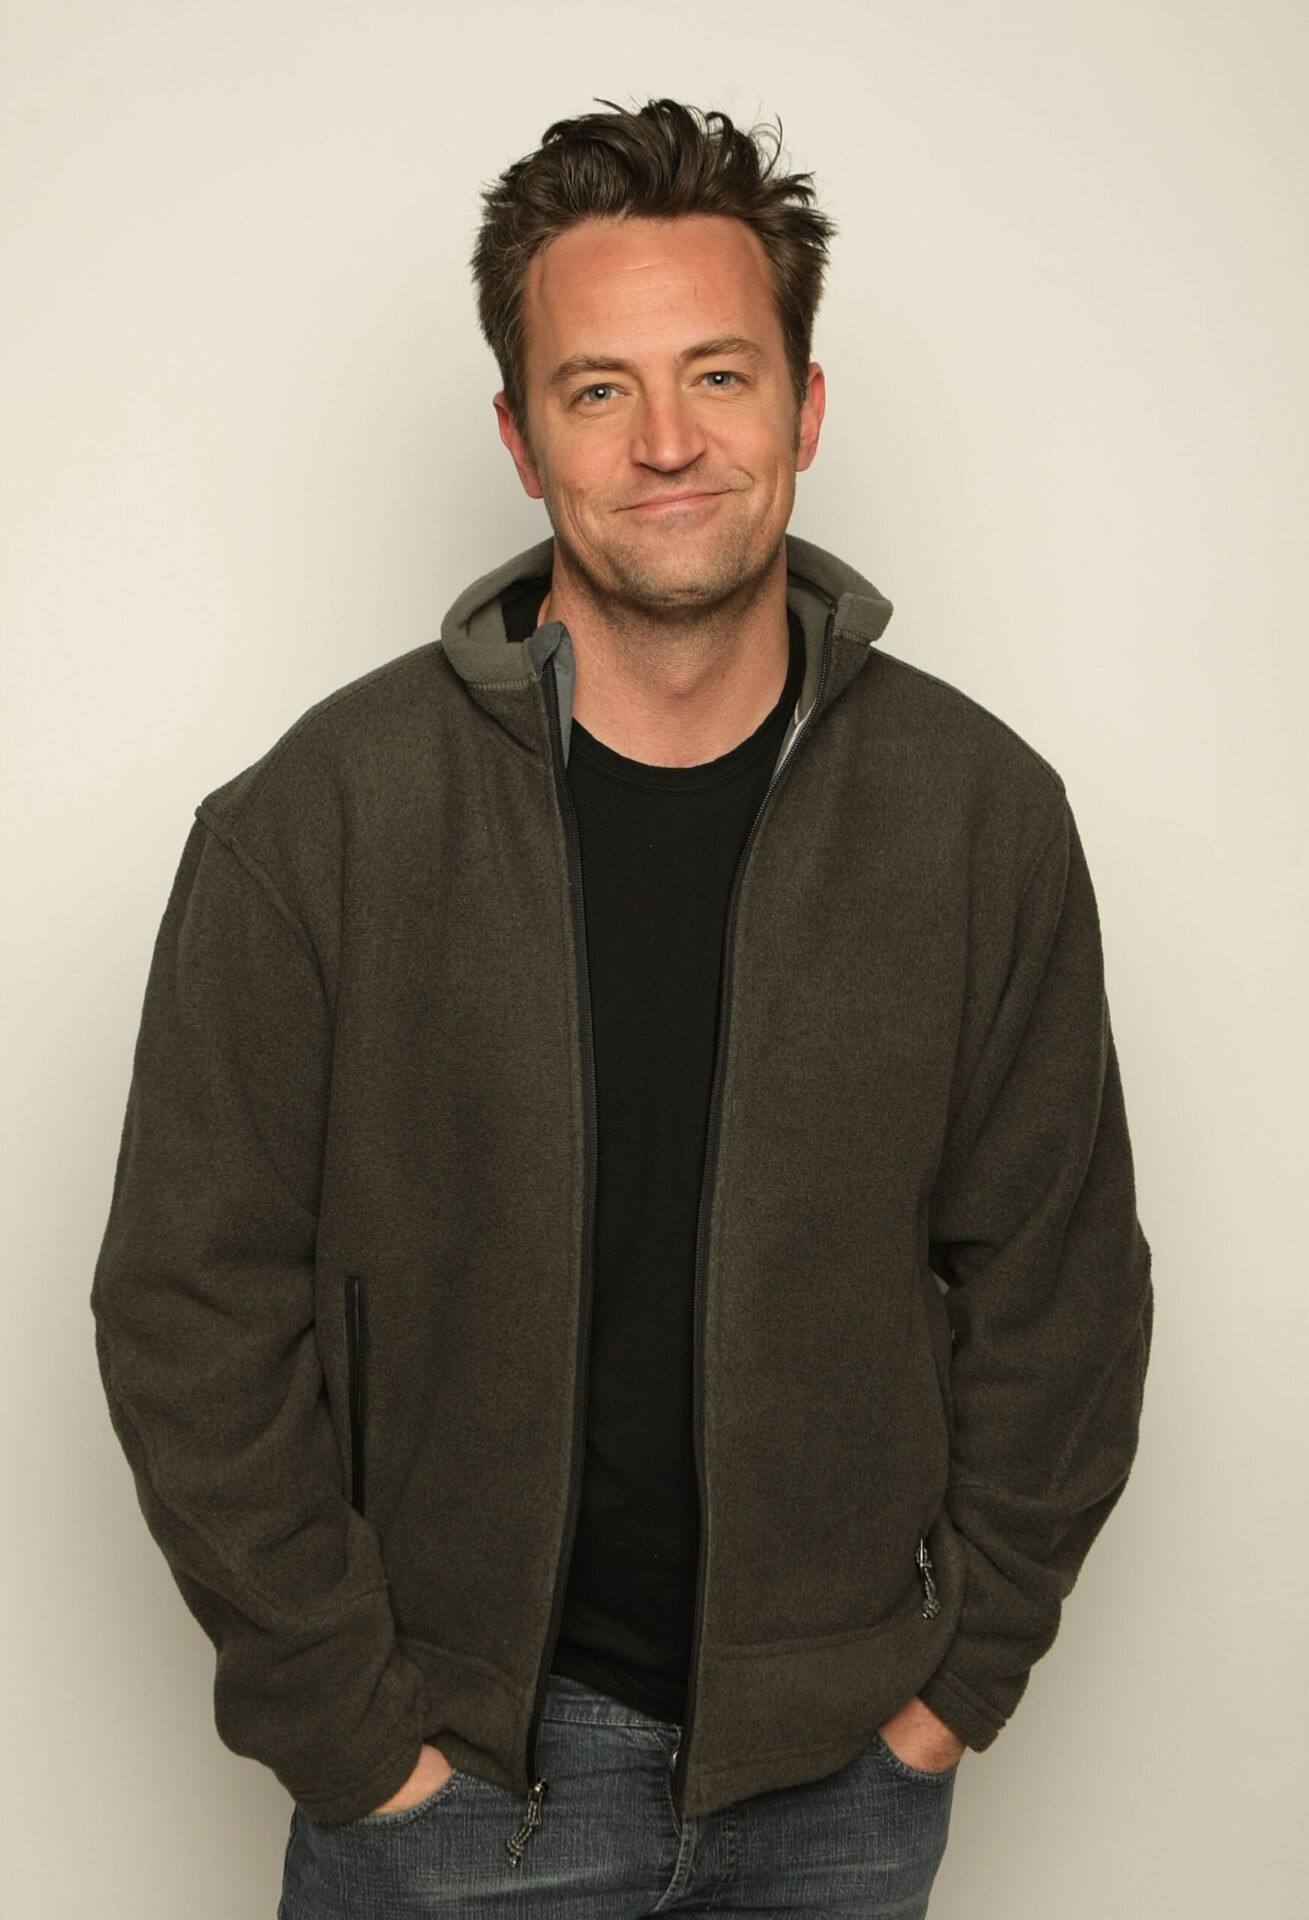 'Friends' star Matthew Perry Dies at 54 after apparent drowning